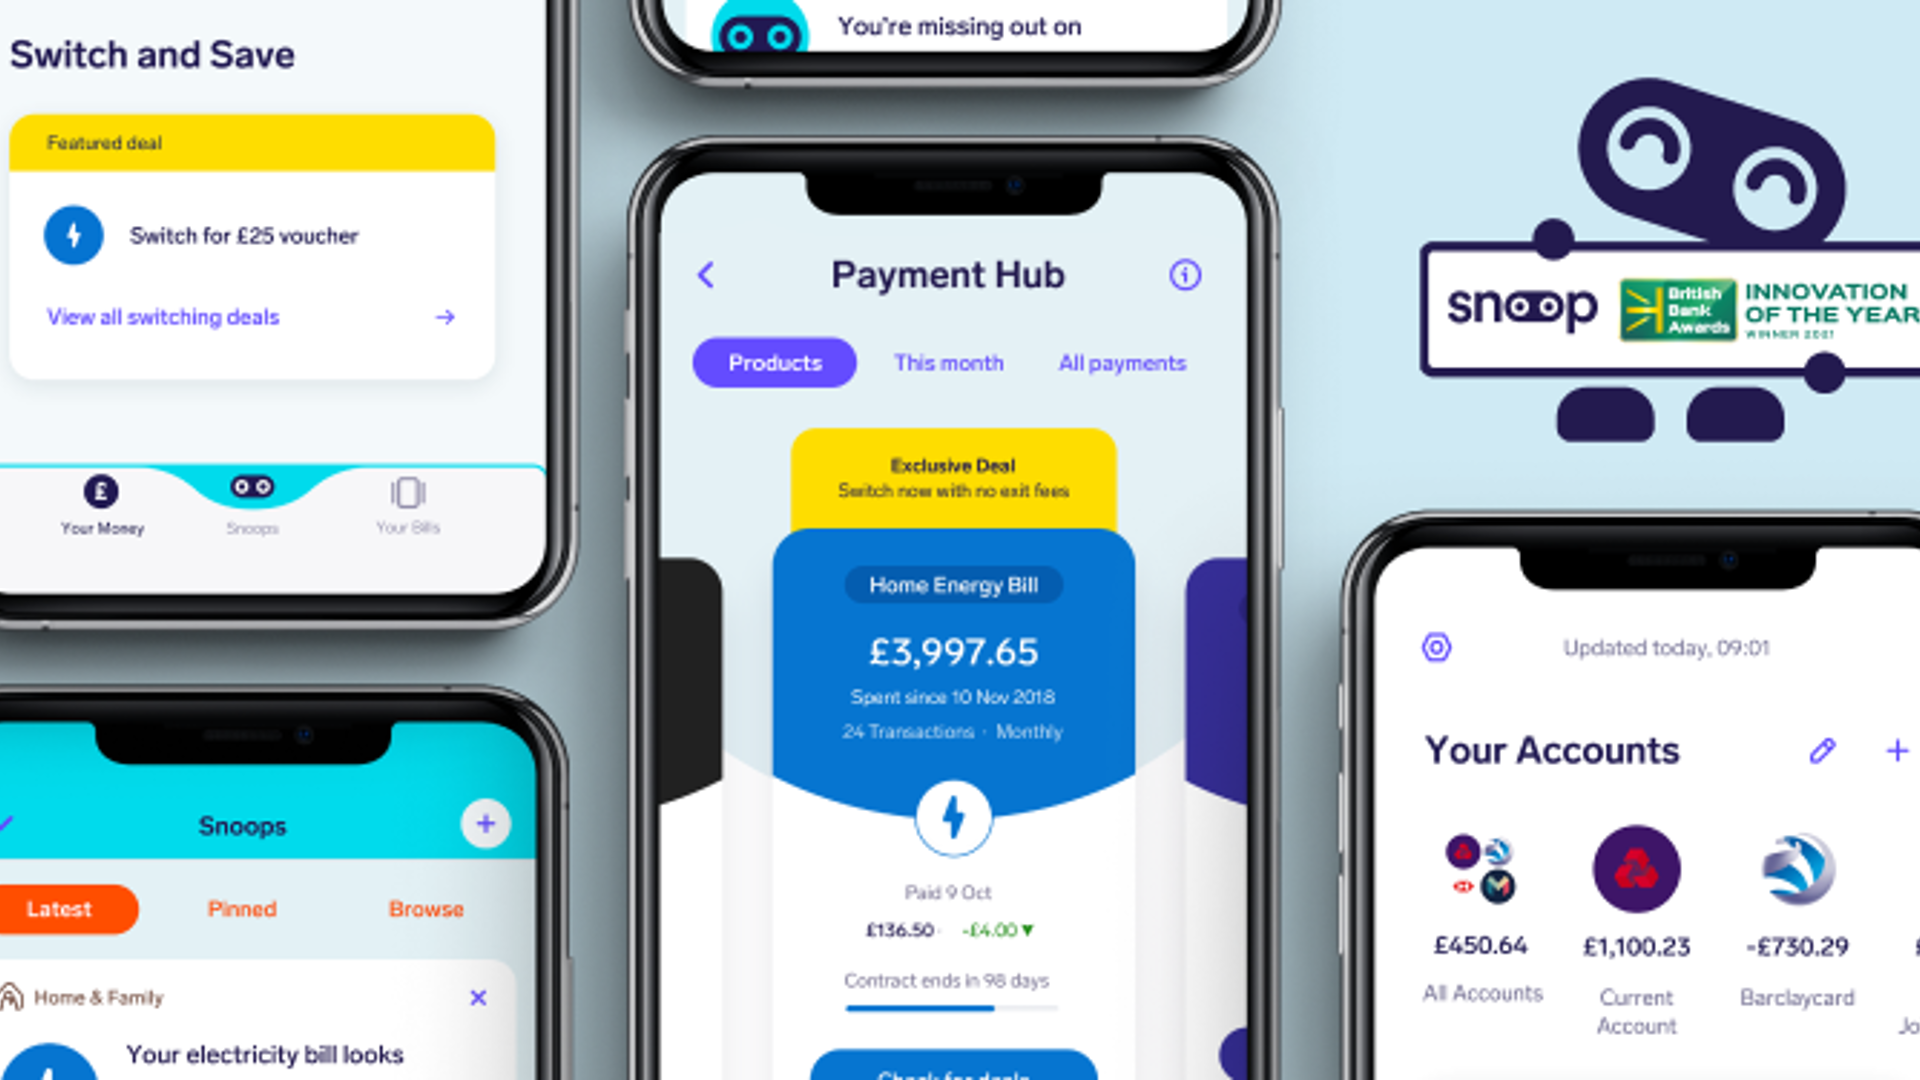 Track your spending and keep on top of your bills